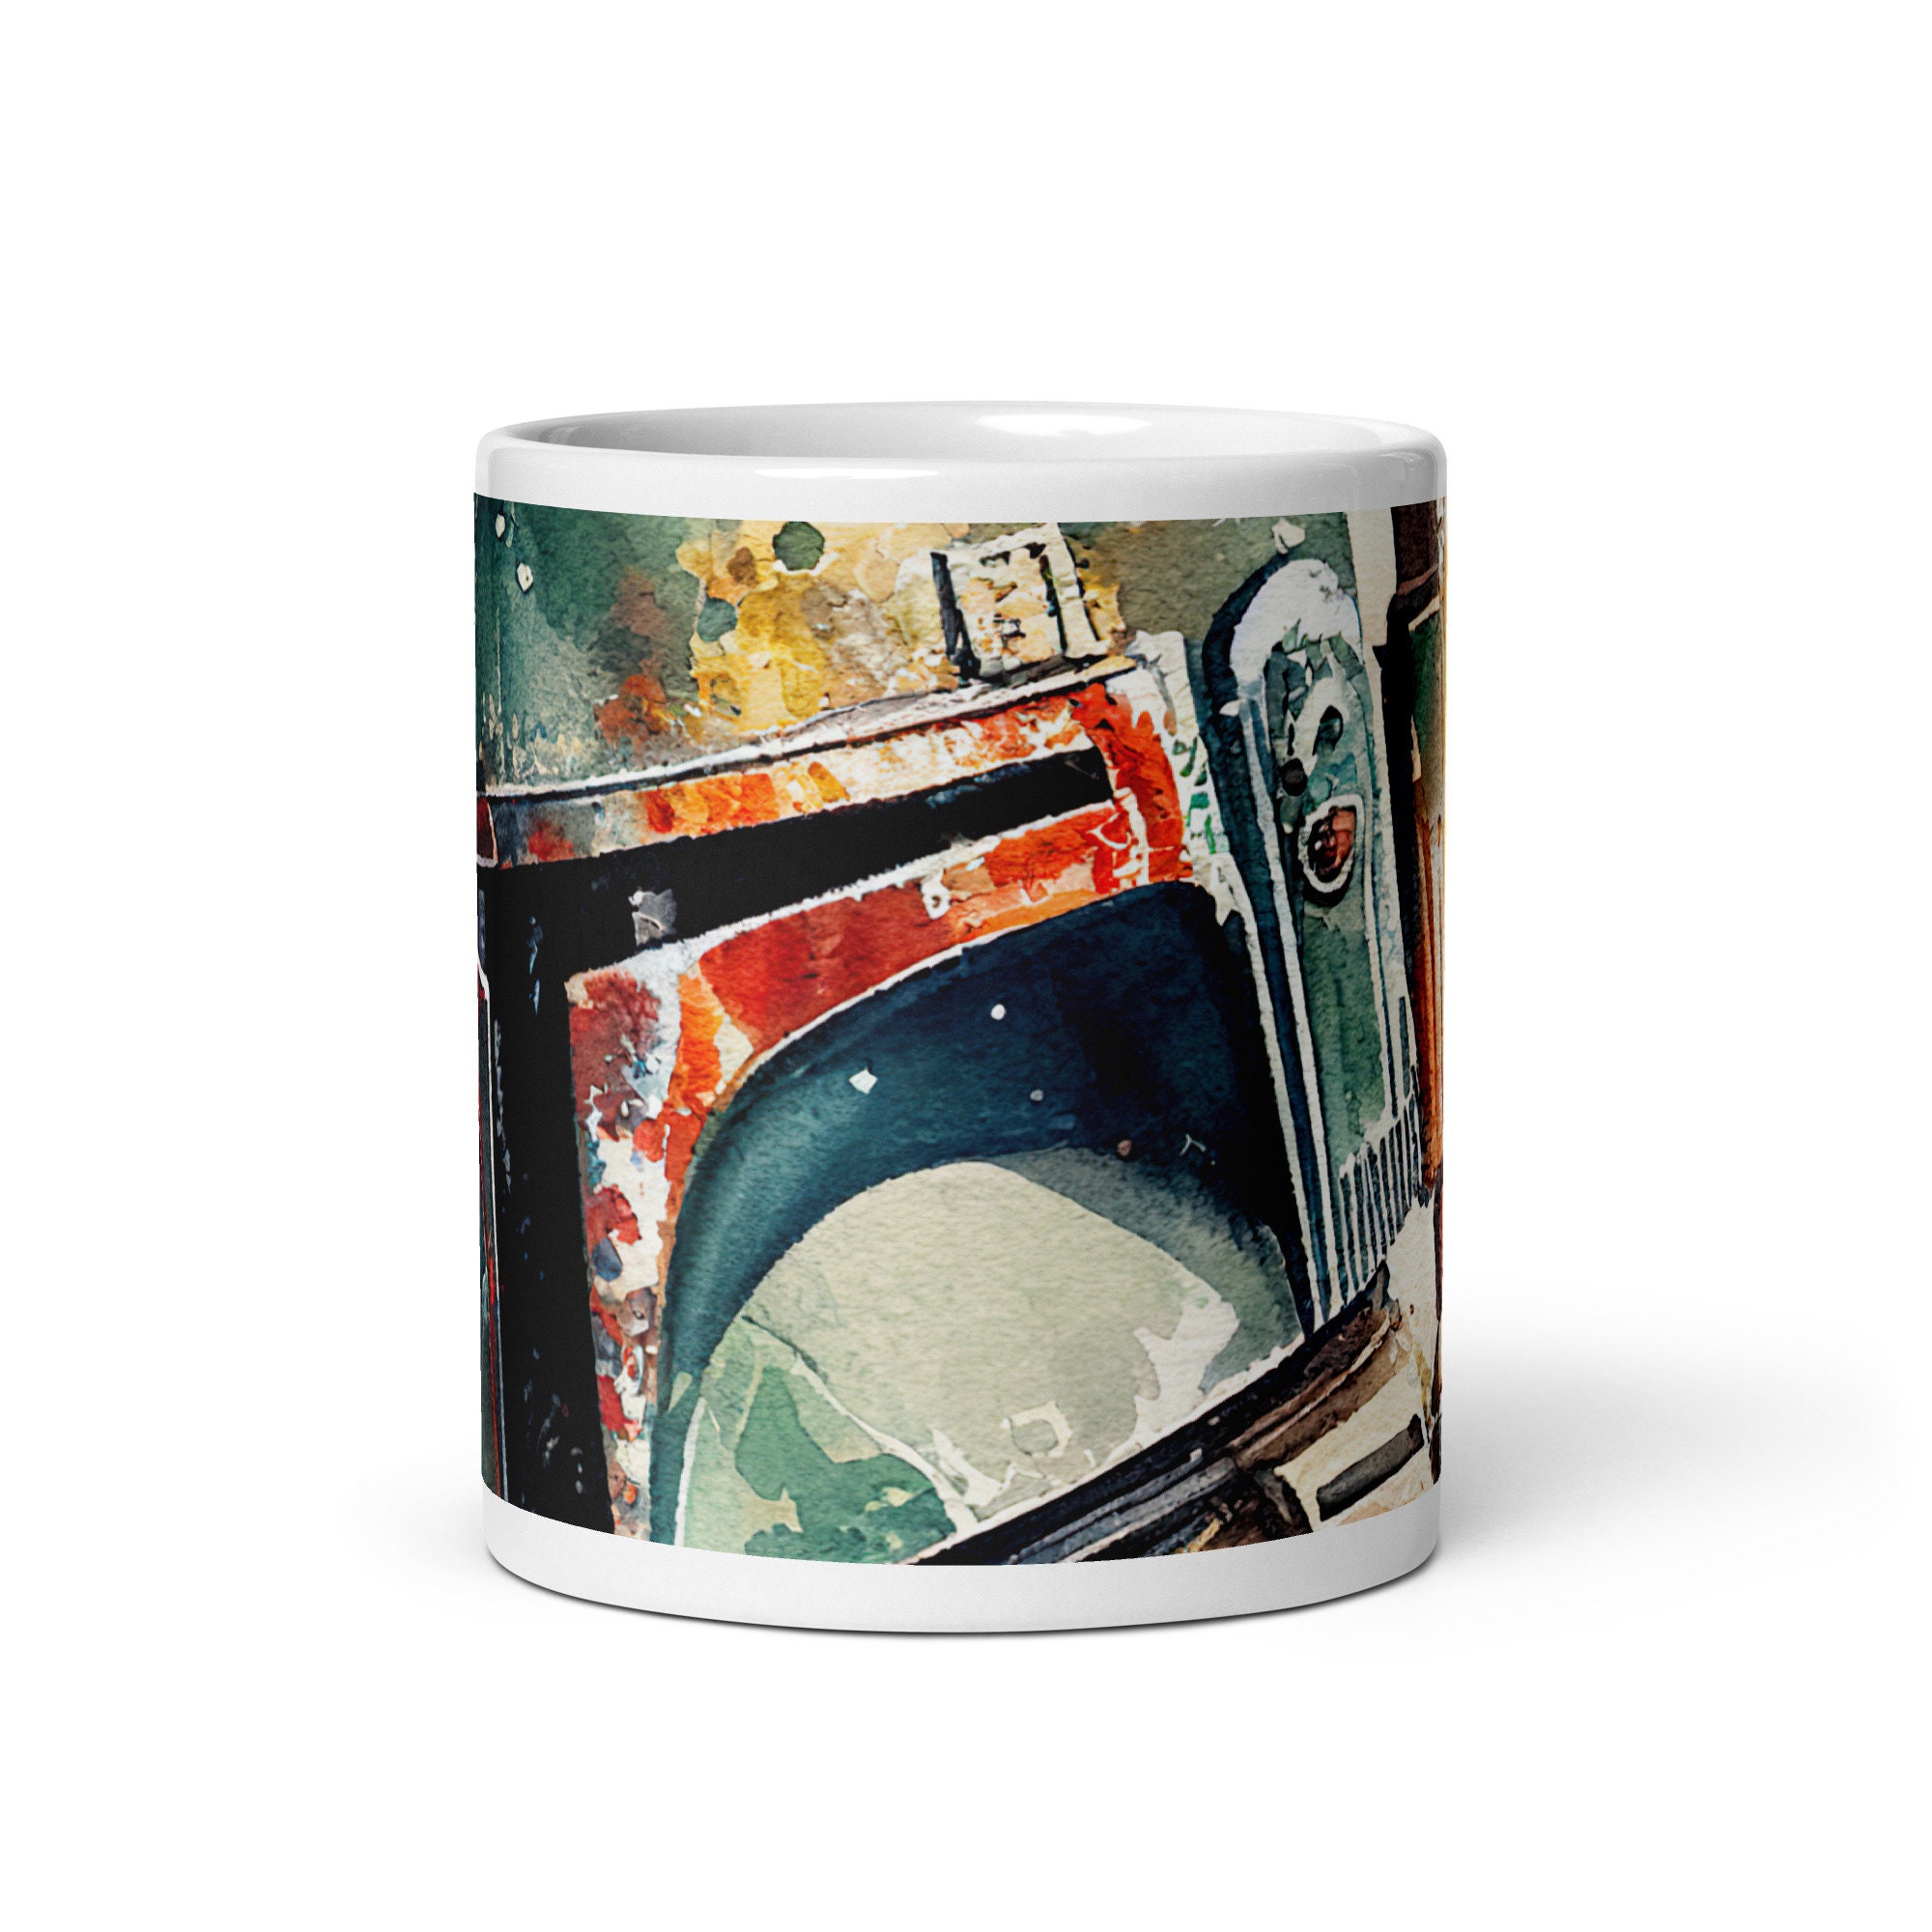  This is The Way Boba Fett's Coffee Mug 100% Stainless Steel  Material Travel Mugs 14oz sizes : Home & Kitchen